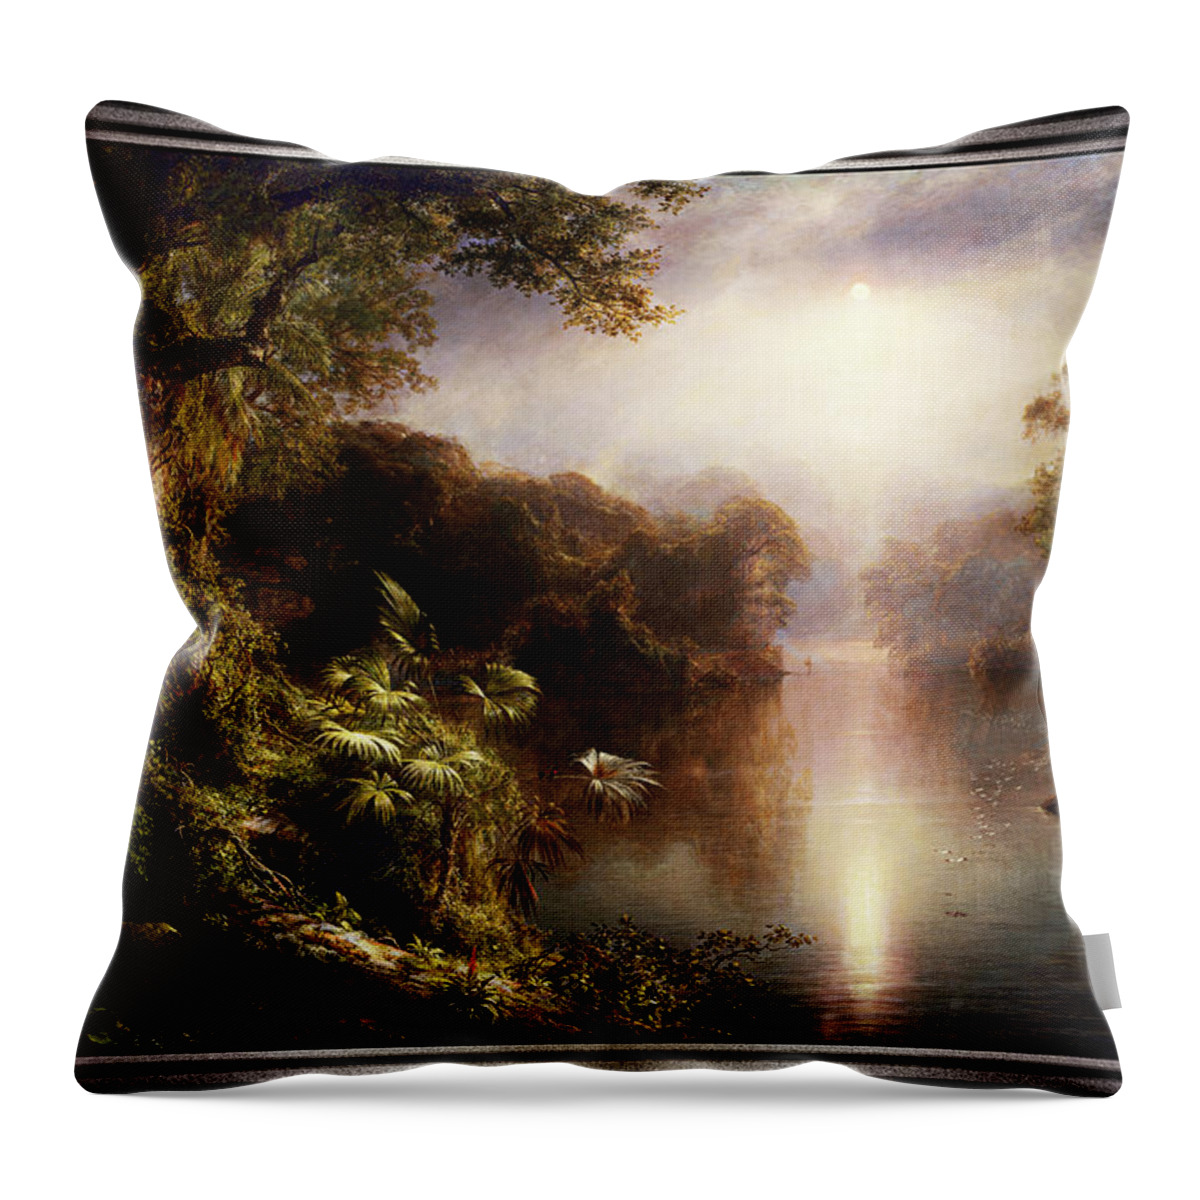 The River Of Light Throw Pillow featuring the painting The River of Light by Frederic Edwin Church by Rolando Burbon